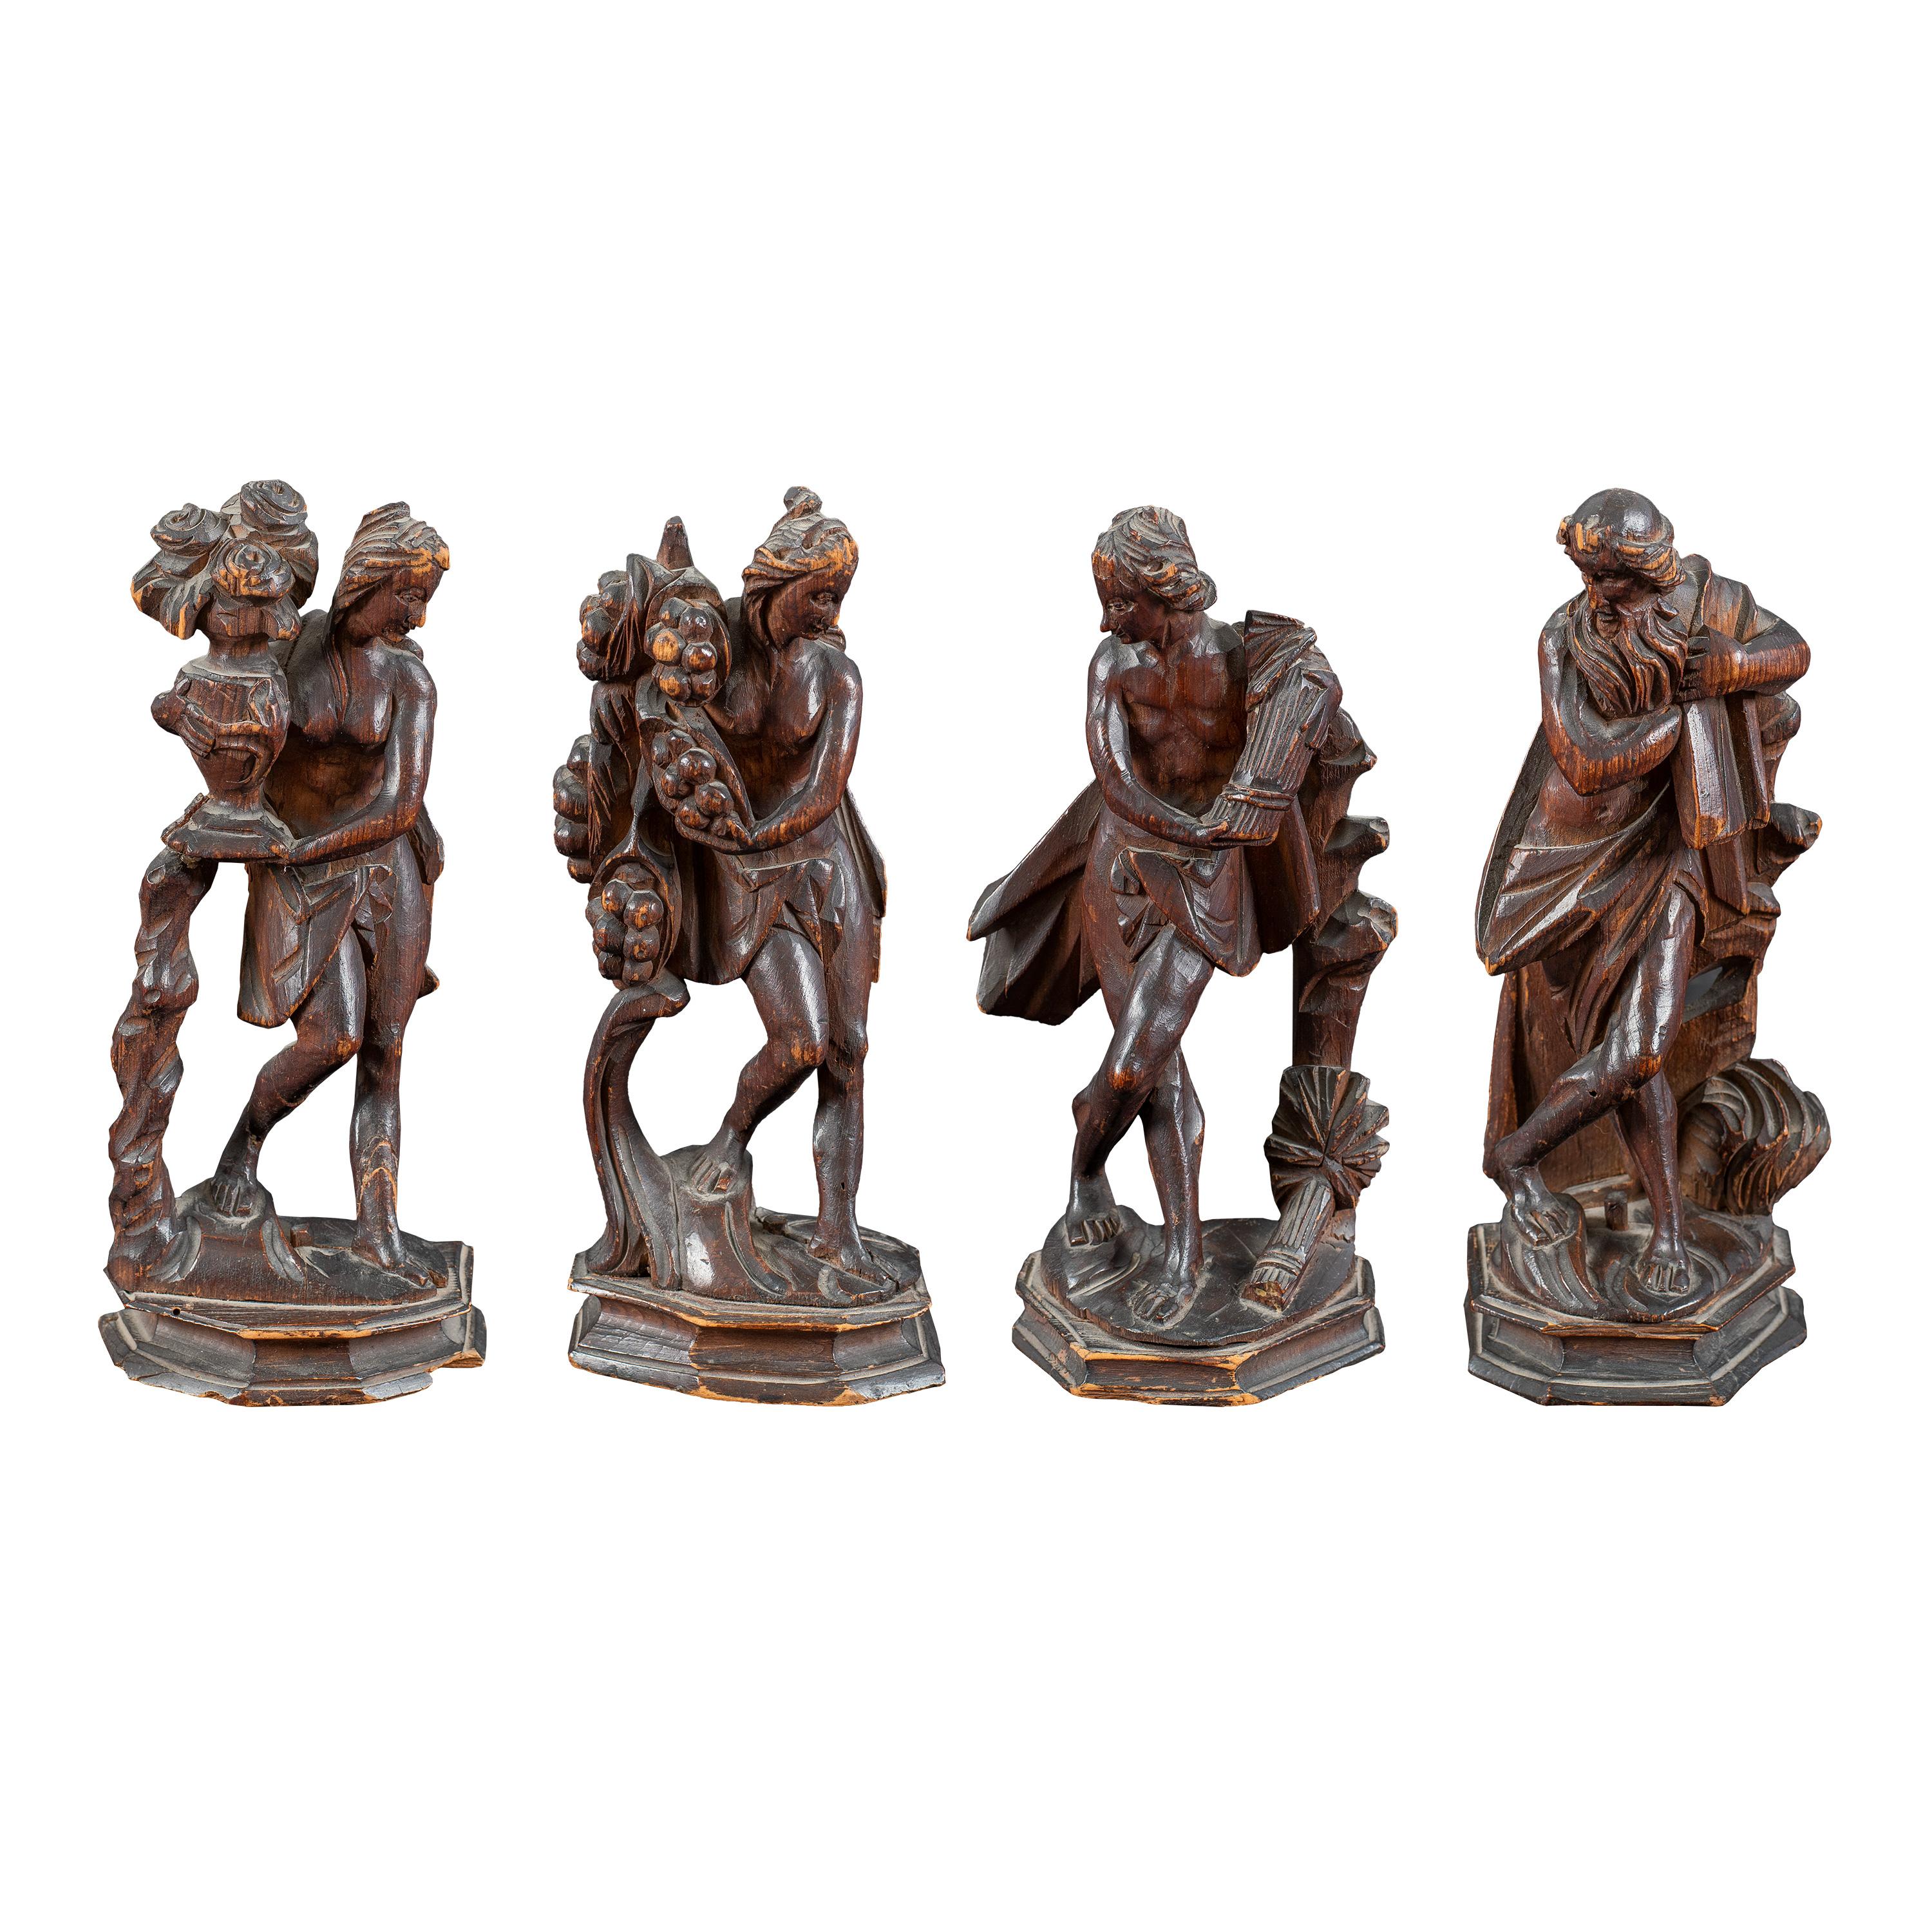 Rococò Venice - Set of four 18th century carved wood sculptures - Seasons